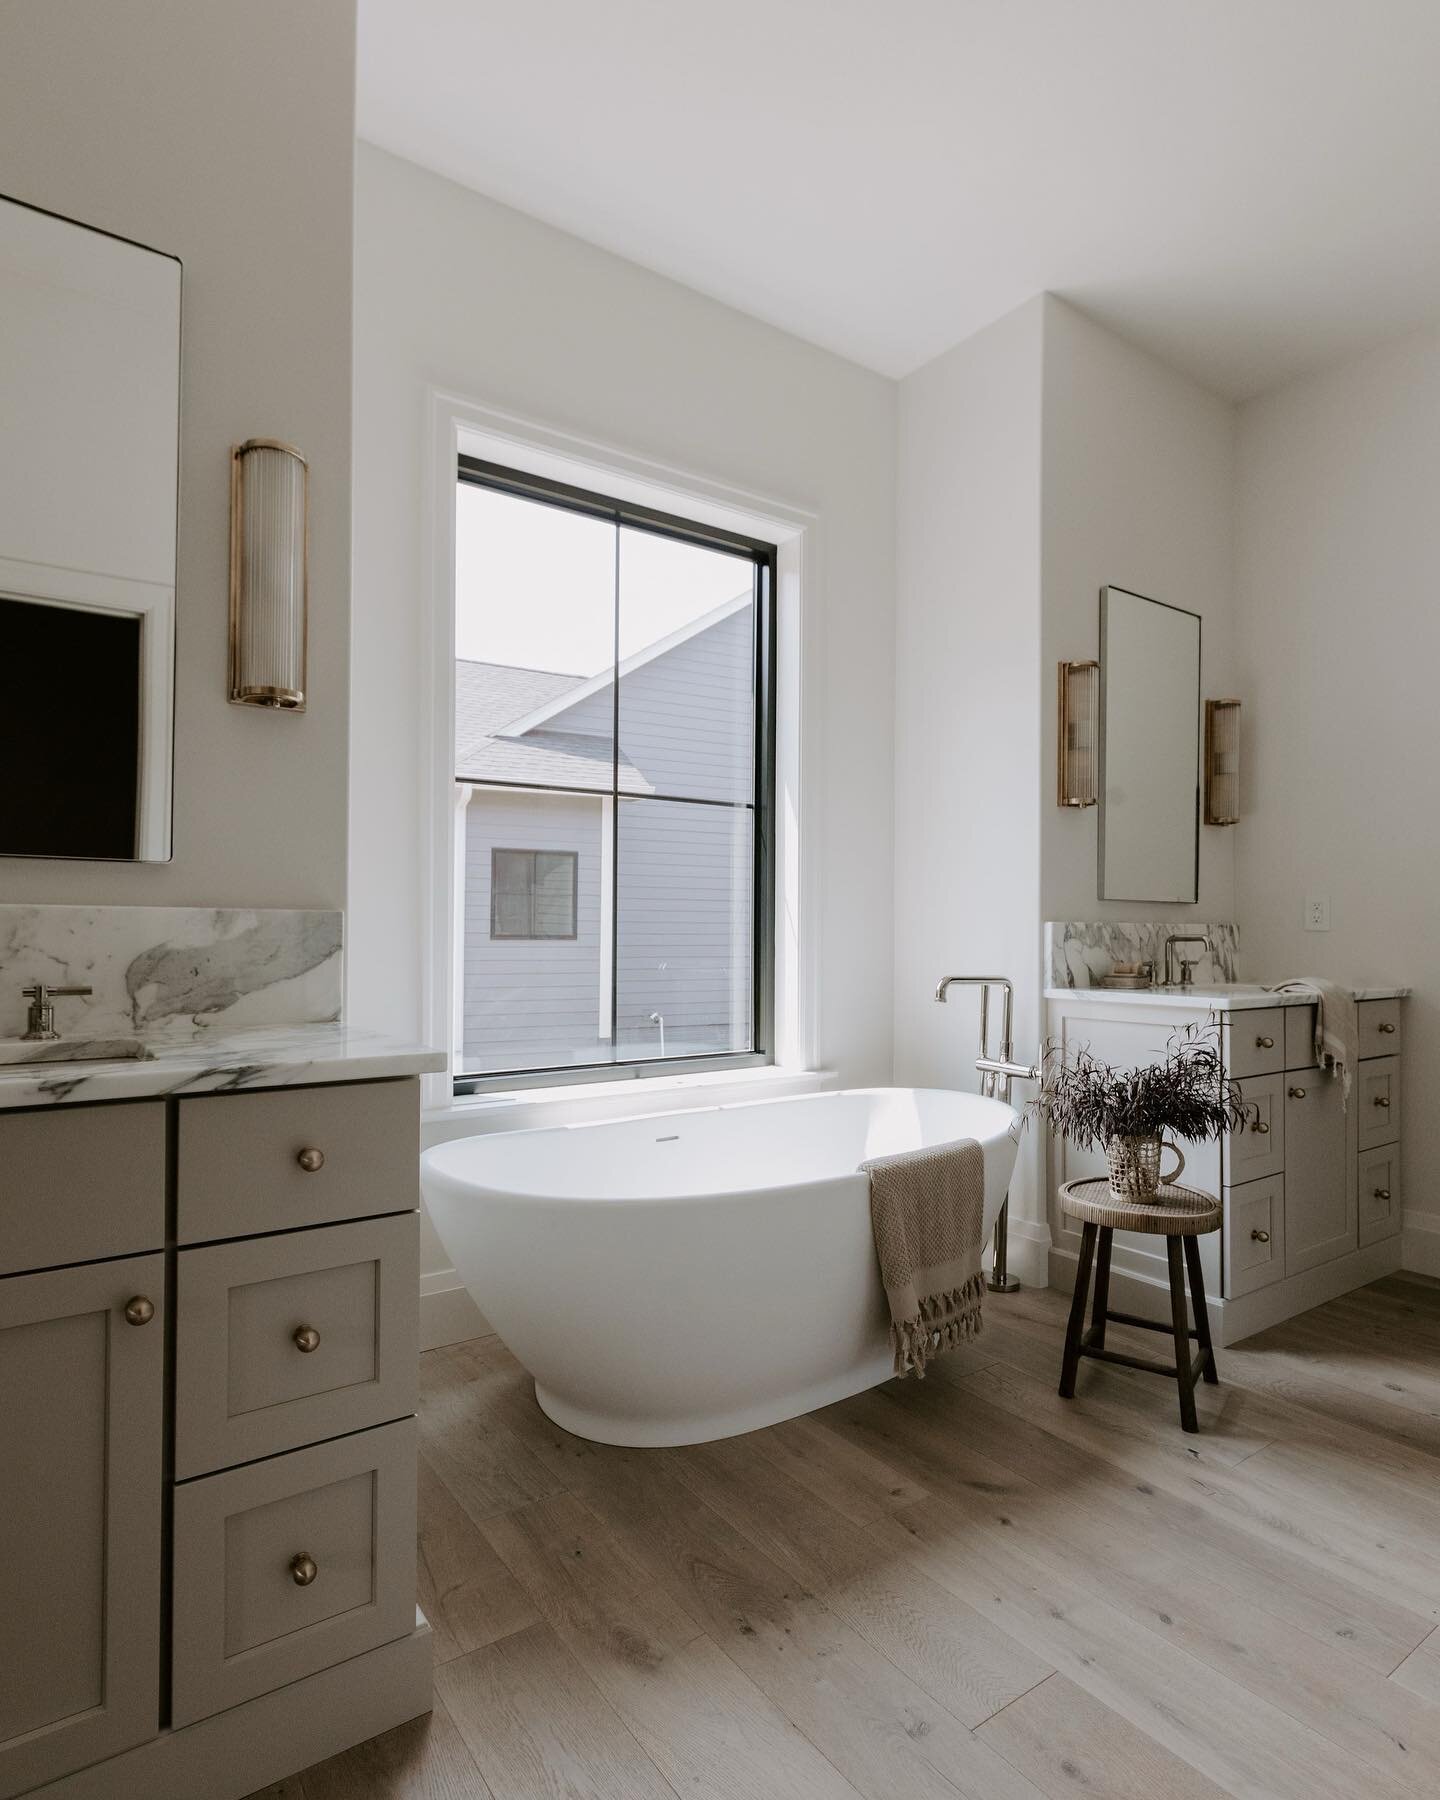 The master bath of our dreams😍 swipe for the most beautiful shower you&rsquo;ve ever seen!
&bull;
&bull;
&bull;
&bull;
📸@brookepavel 

#bathroomdesign #husbandandwifeteam #SMmakelifebeautiful #bhghome #rshome 
#mcgeeandco #mydomaine #iowabuilder #h